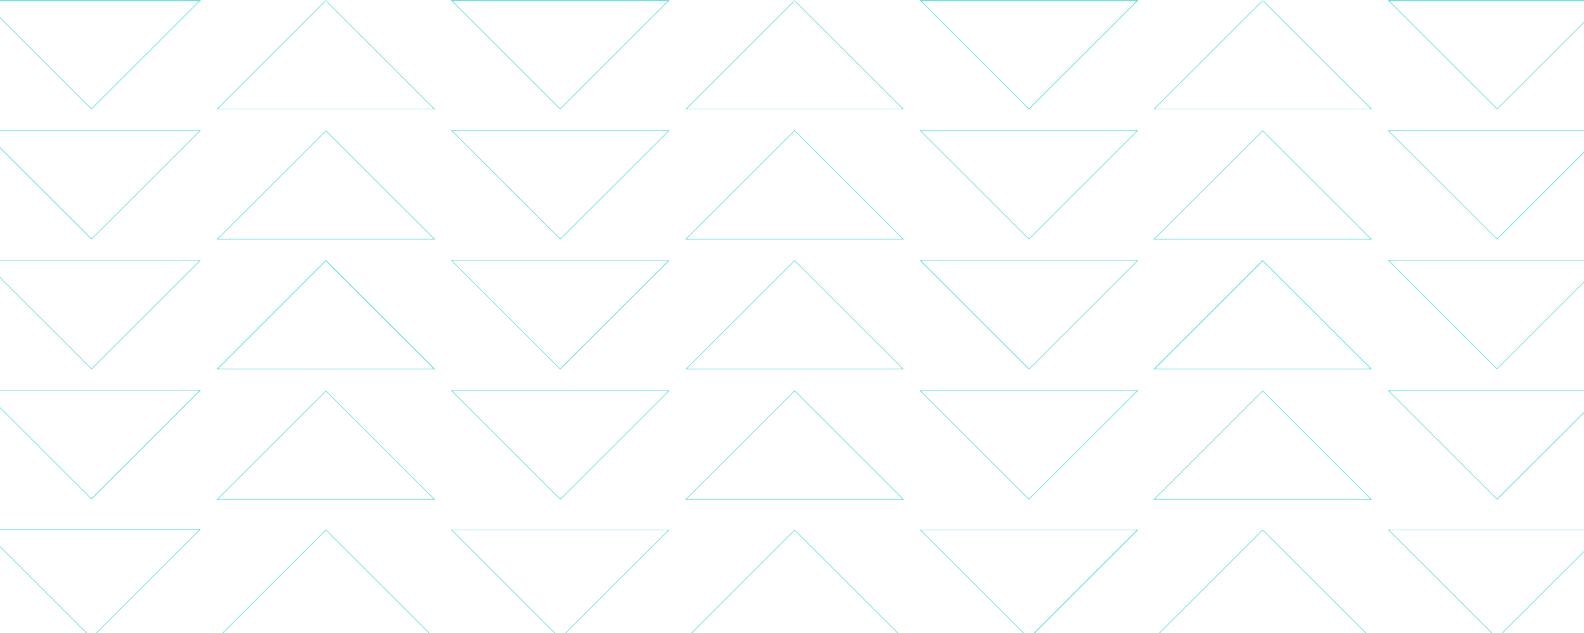 Illustration showing thin blue lines forming delicate triangular patterns